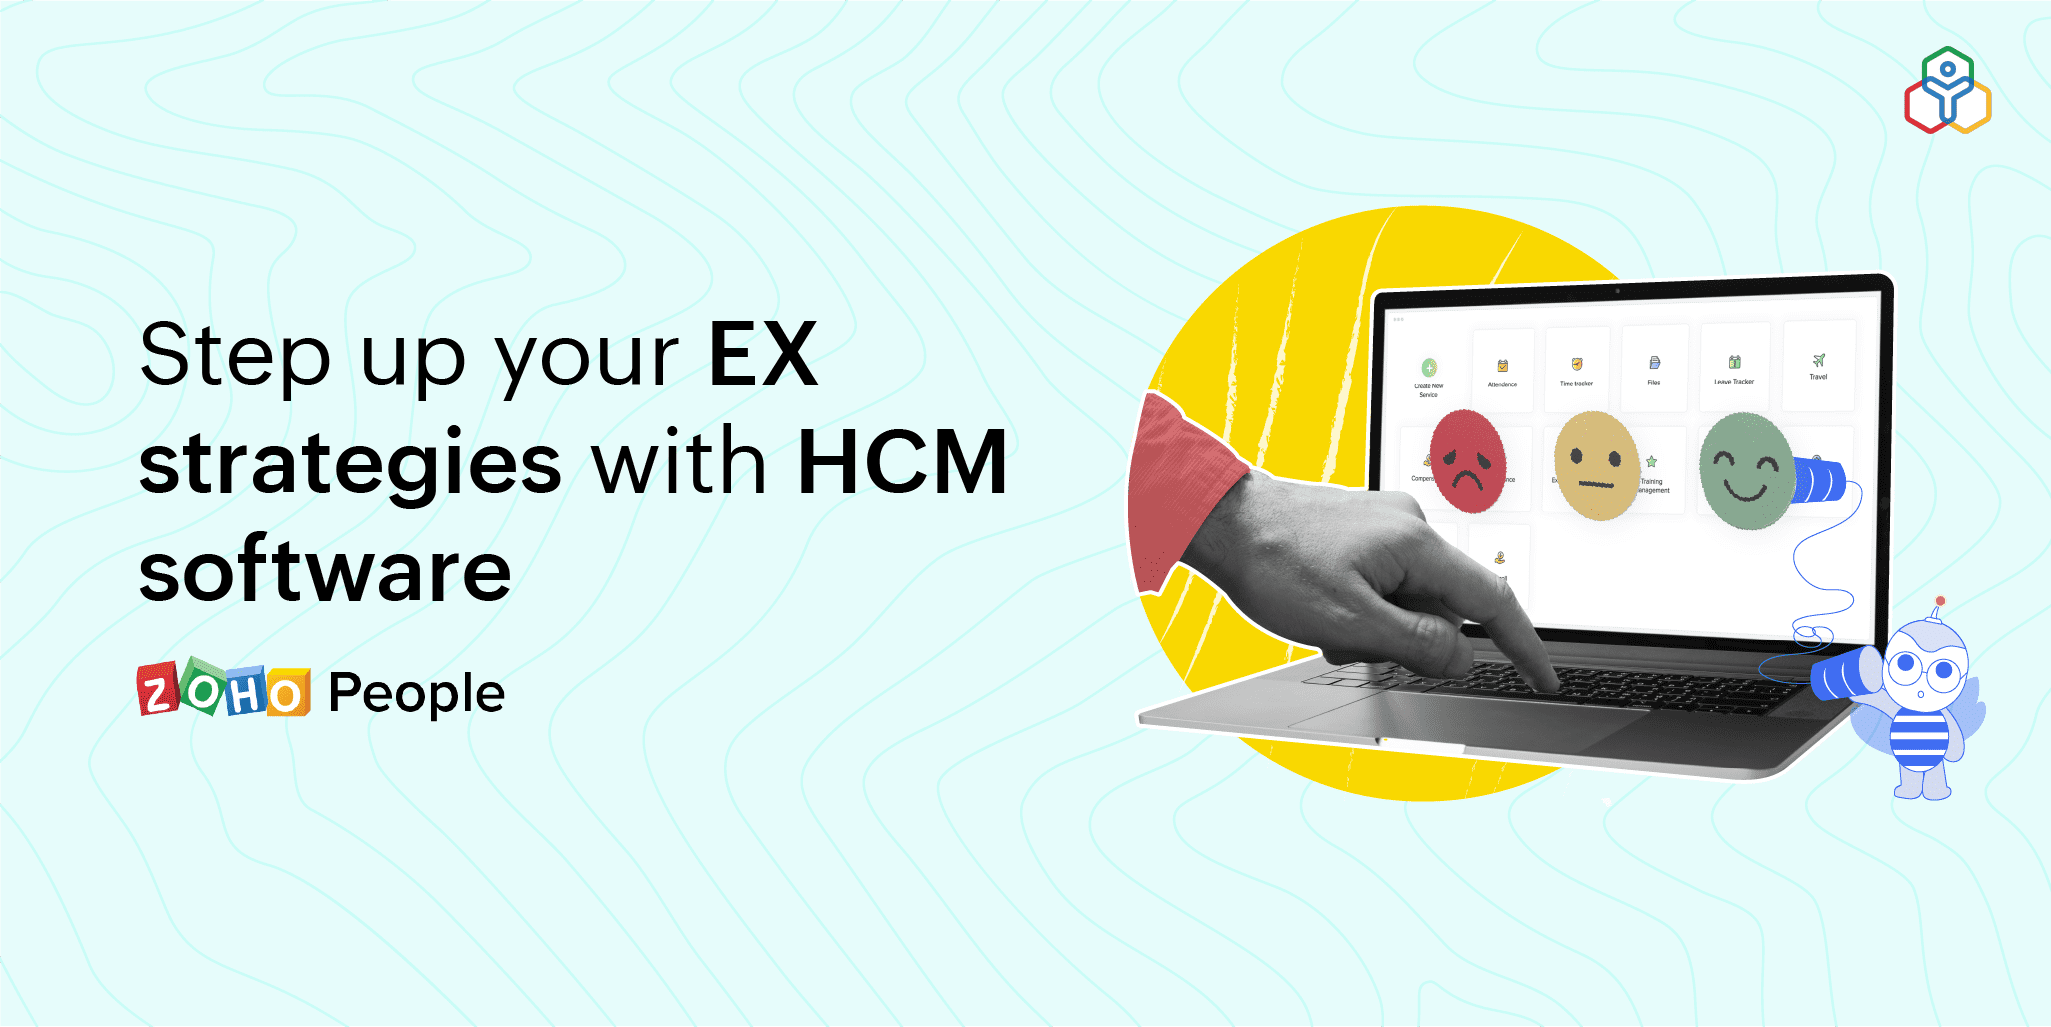 4 ways HCM software contributes to employee experience